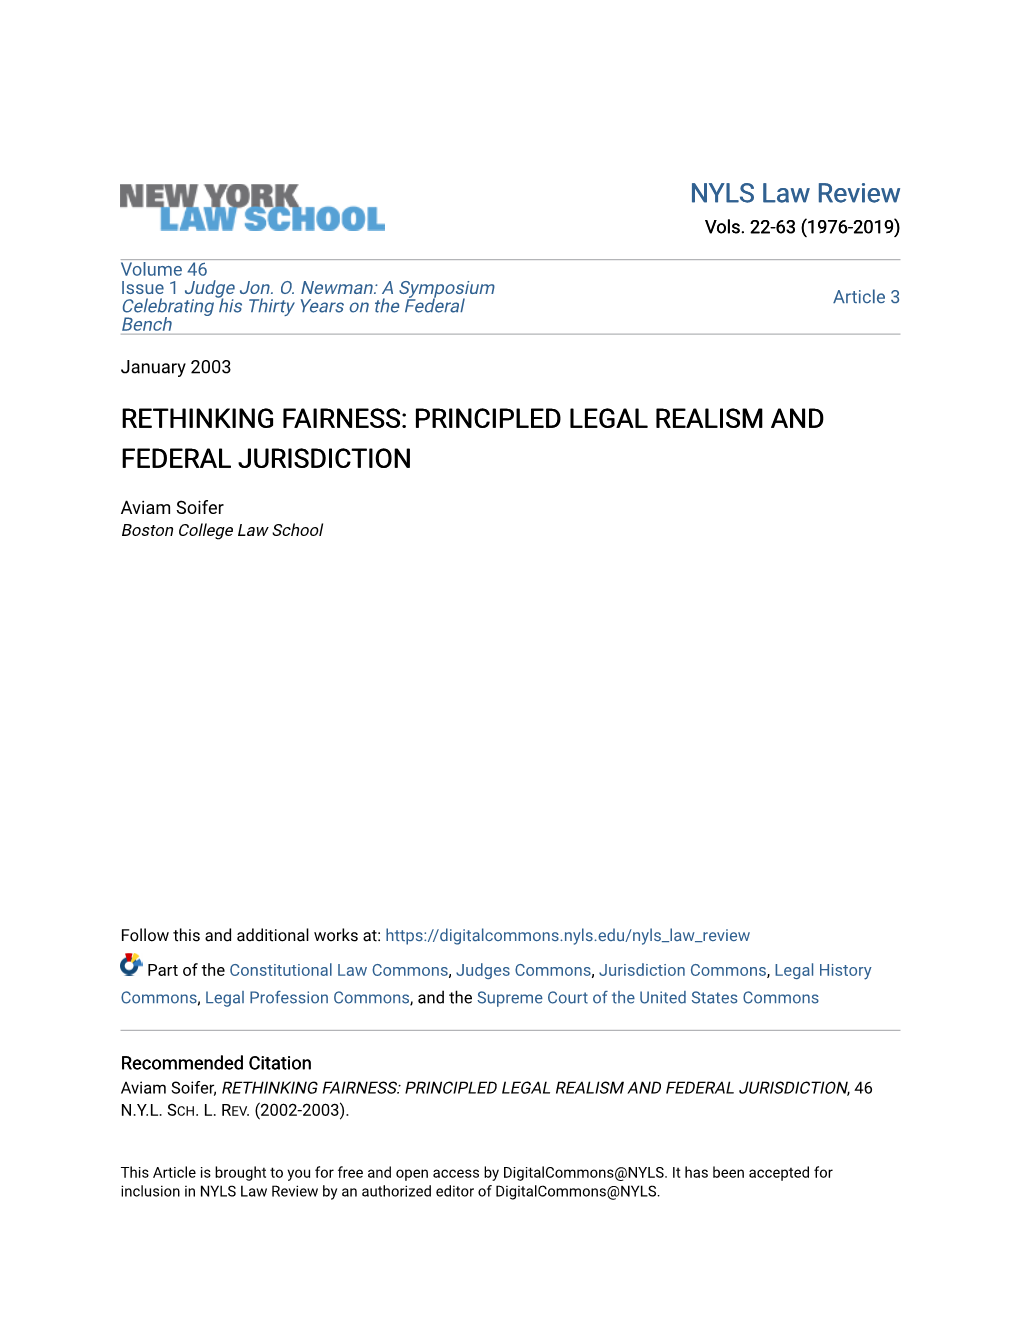 Rethinking Fairness: Principled Legal Realism and Federal Jurisdiction